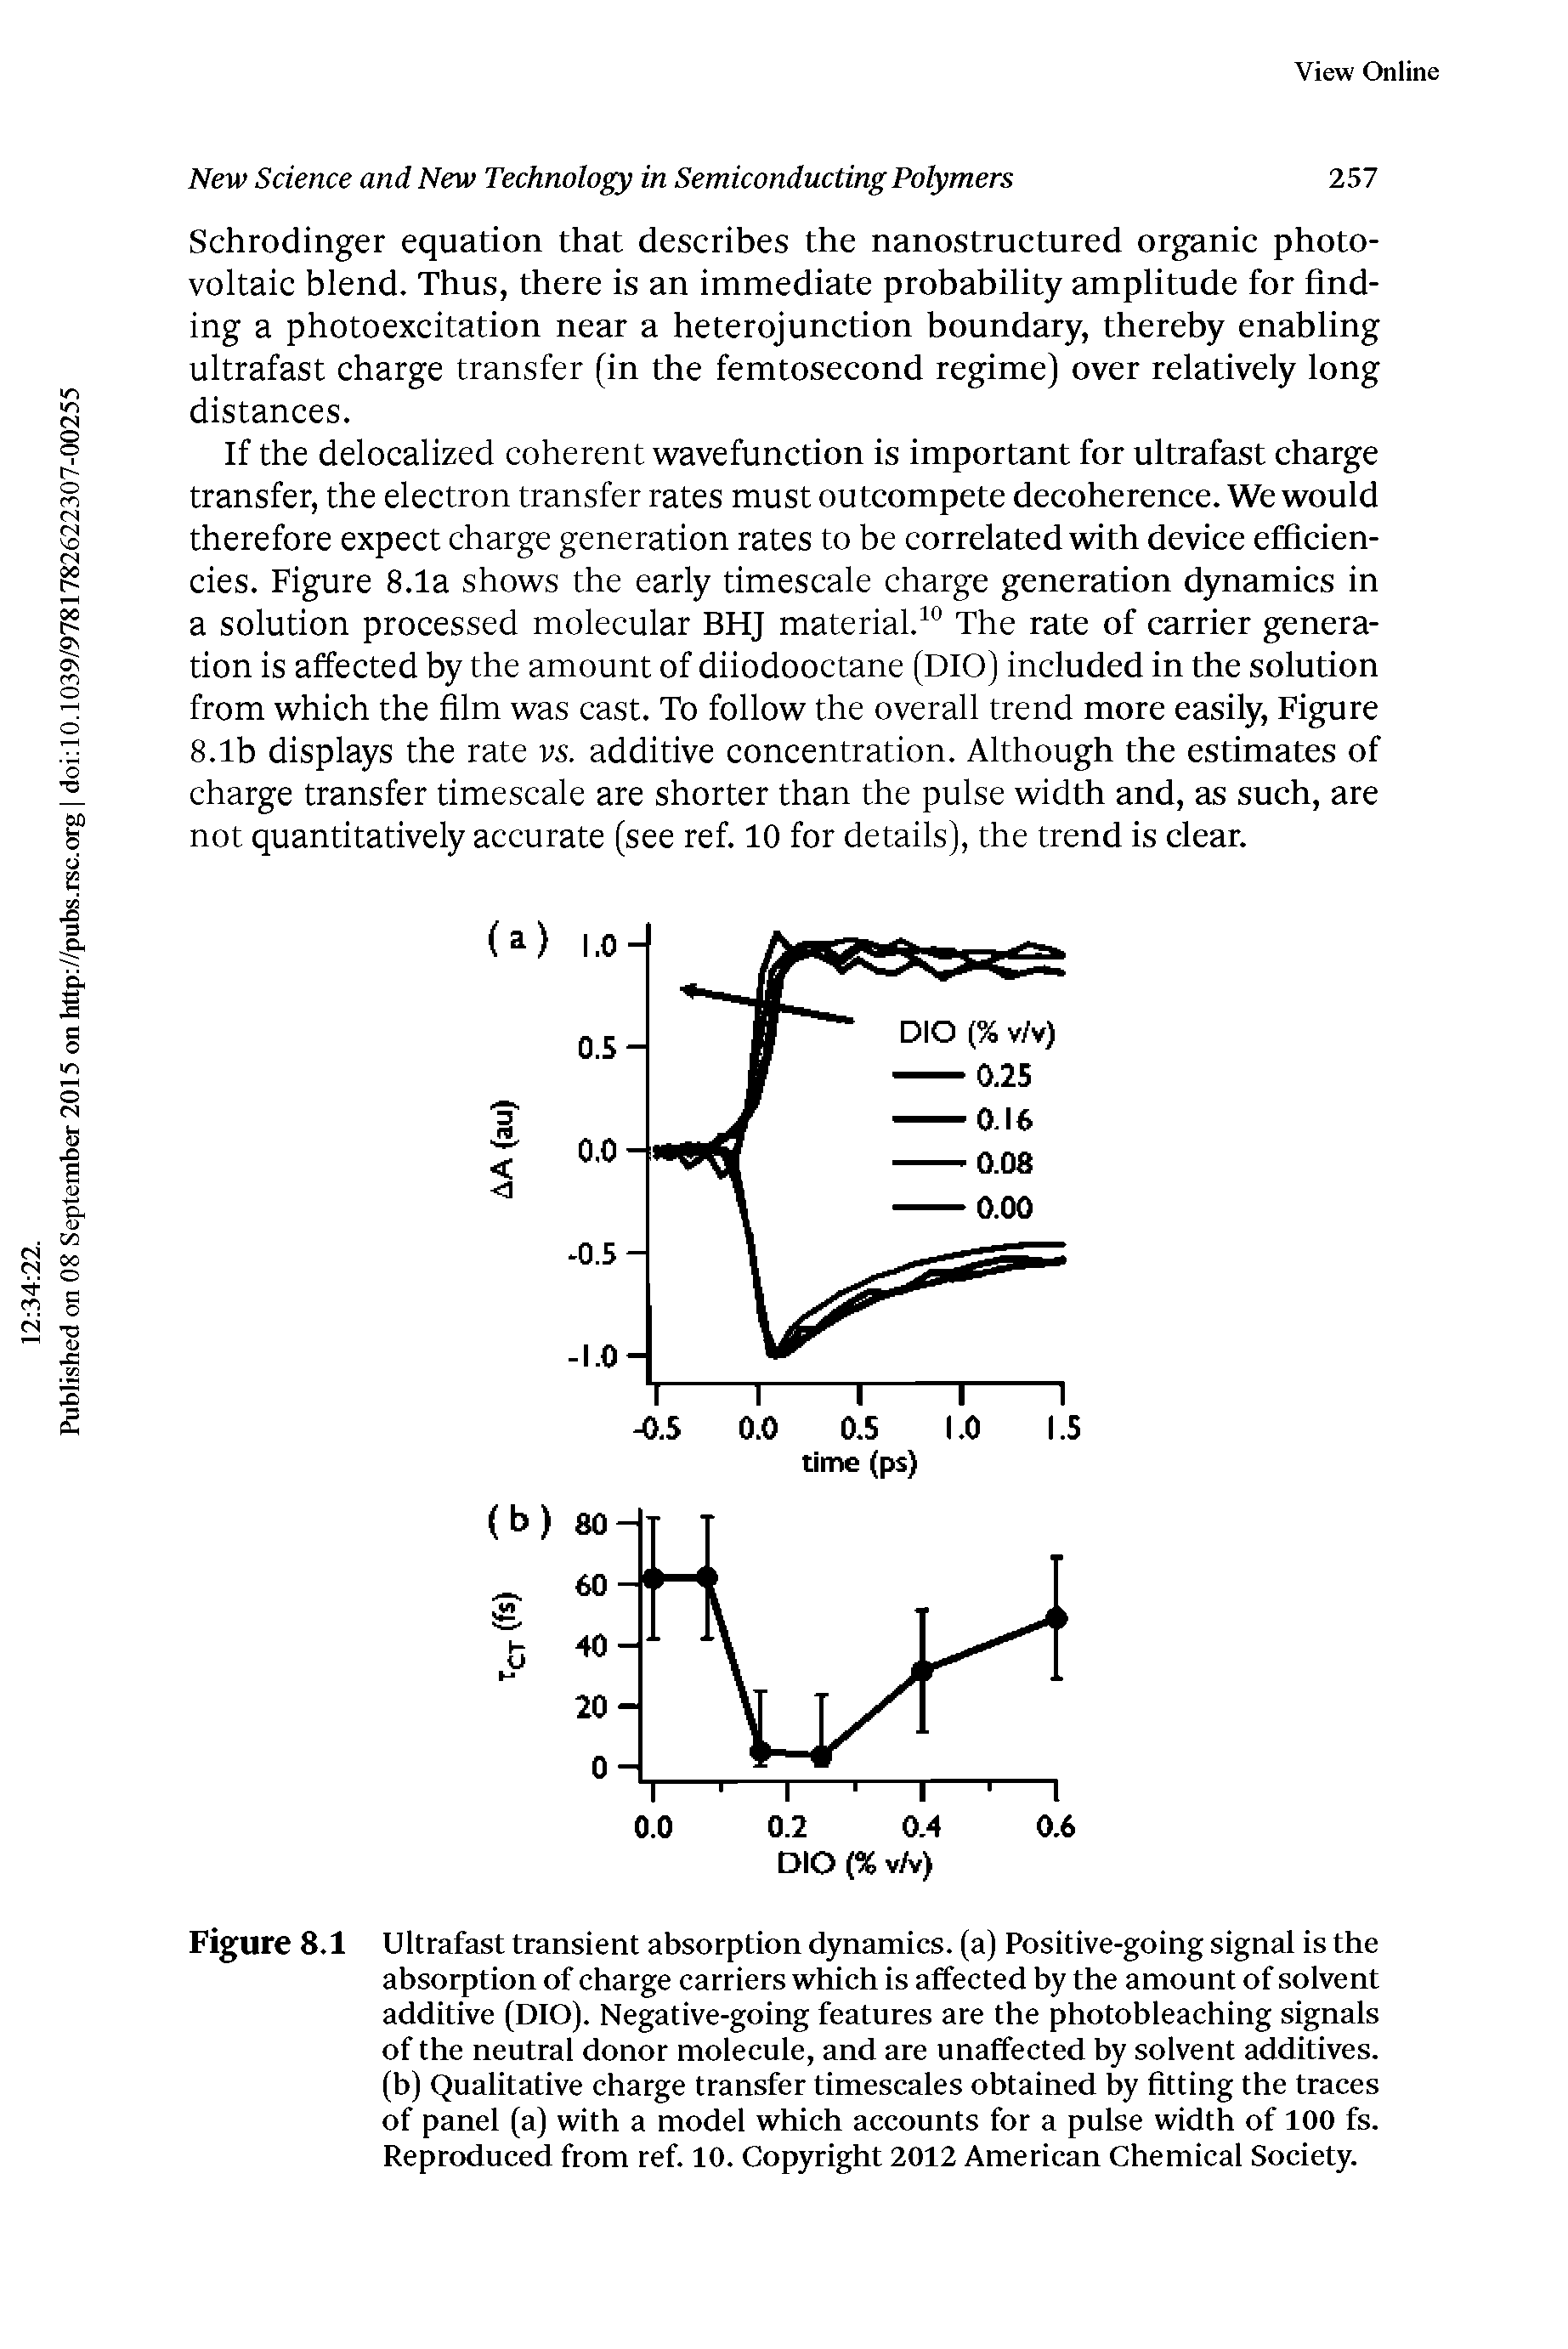 Figure 8.1 Ultrafast transient absorption dynamics, (a) Positive-going signal is the absorption of charge carriers which is affected by the amount of solvent additive (DIO). Negative-going features are the photobleaching signals of the neutral donor molecule, and are unaffected by solvent additives, (b) Qualitative charge transfer timescales obtained by fitting the traces of panel (a) with a model which accounts for a pulse width of 100 fs. Reproduced from ref. 10. Copyright 2012 American Chemical Society.